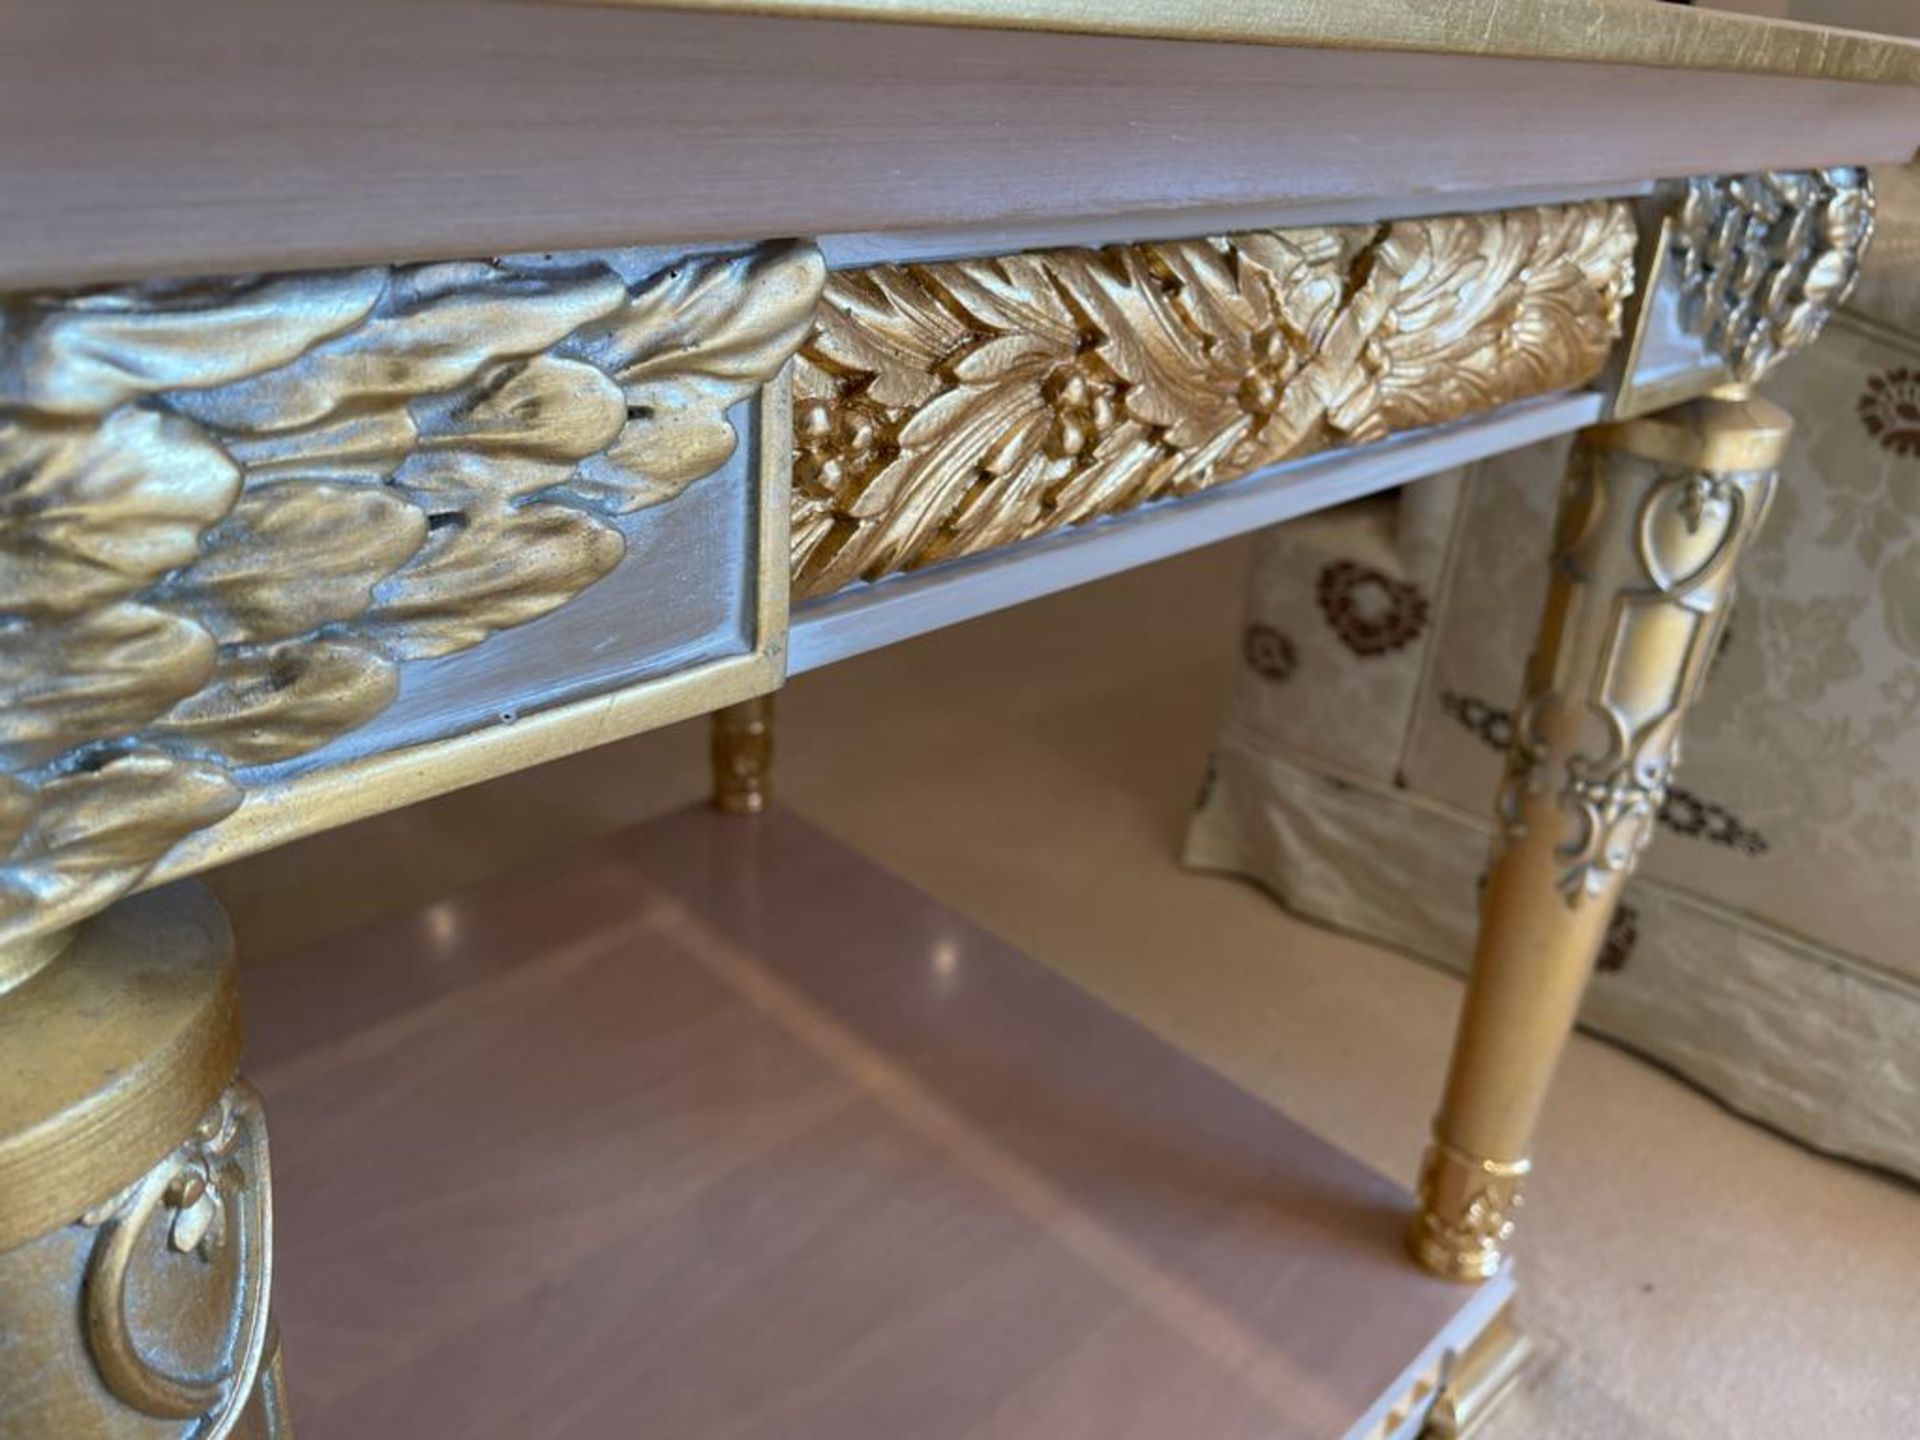 2 x Hand Carved Ornate Side Tables Complimented With Birchwood Veneer, Golden Pillar Legs, Carved - Image 12 of 13